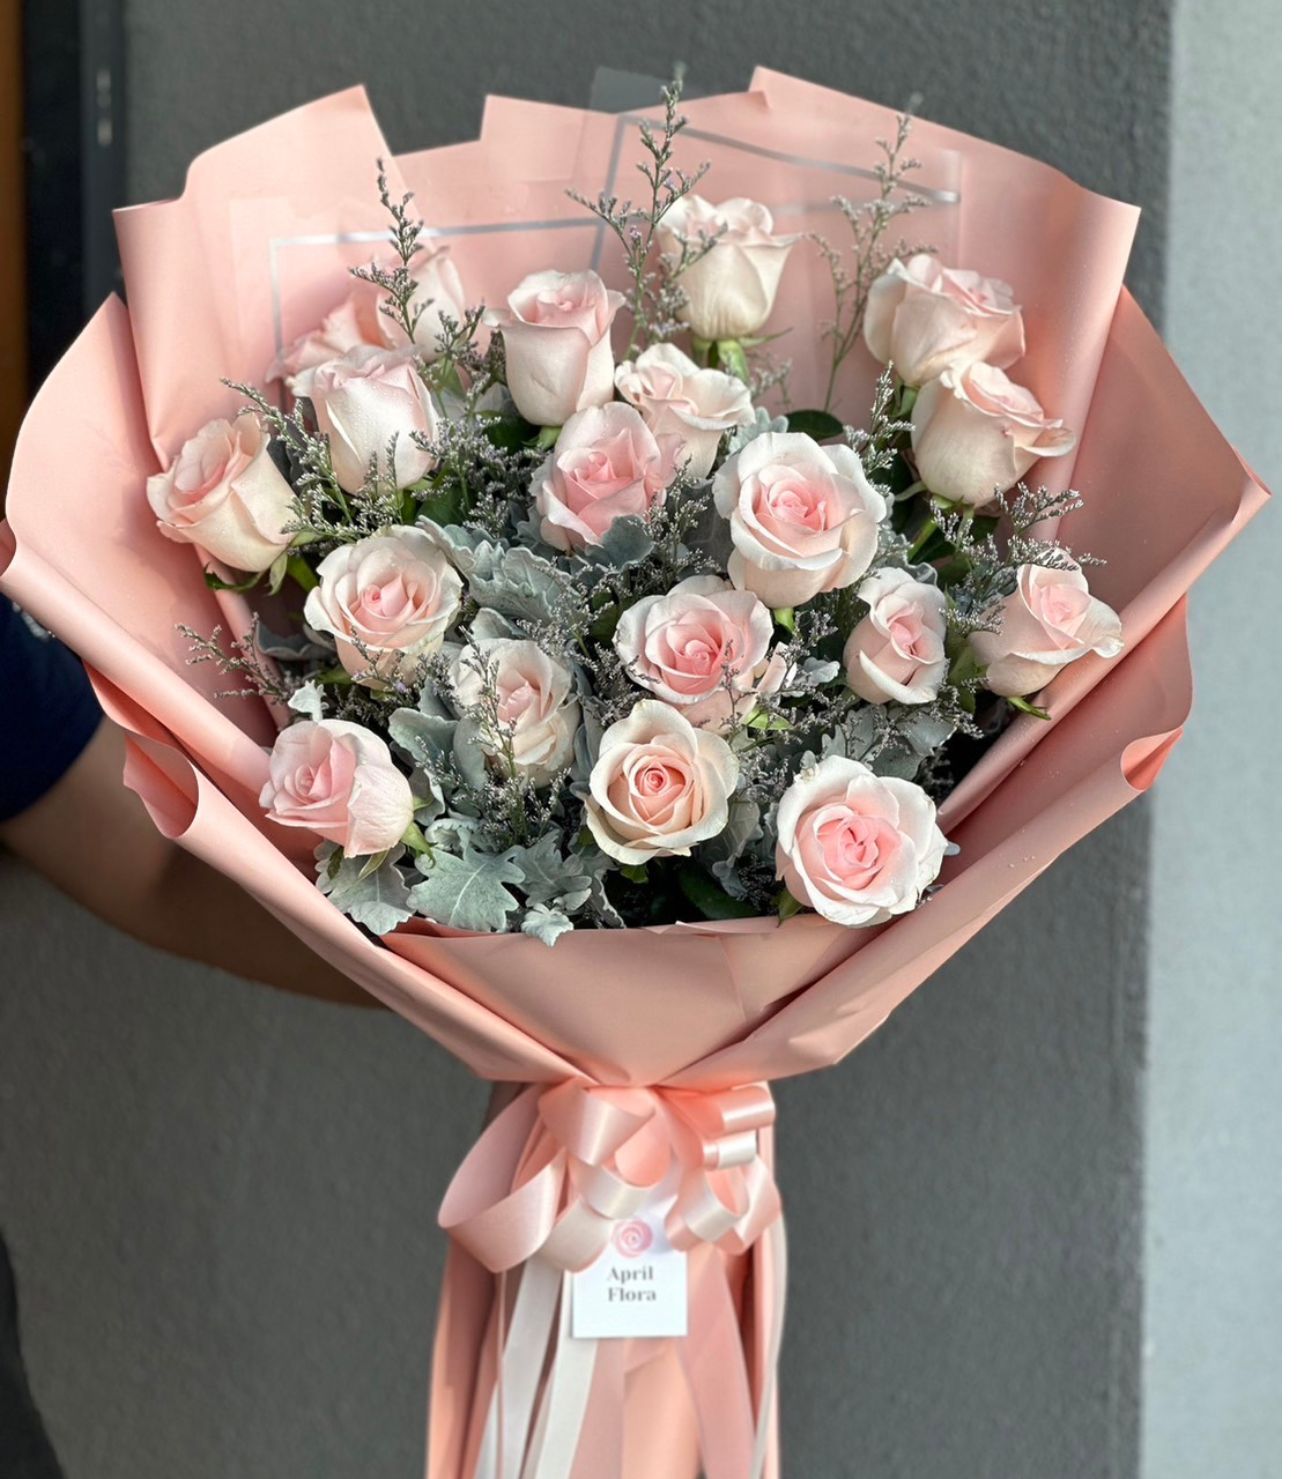 "Adore" Bouquet Of 20 Pink Roses With Caspia